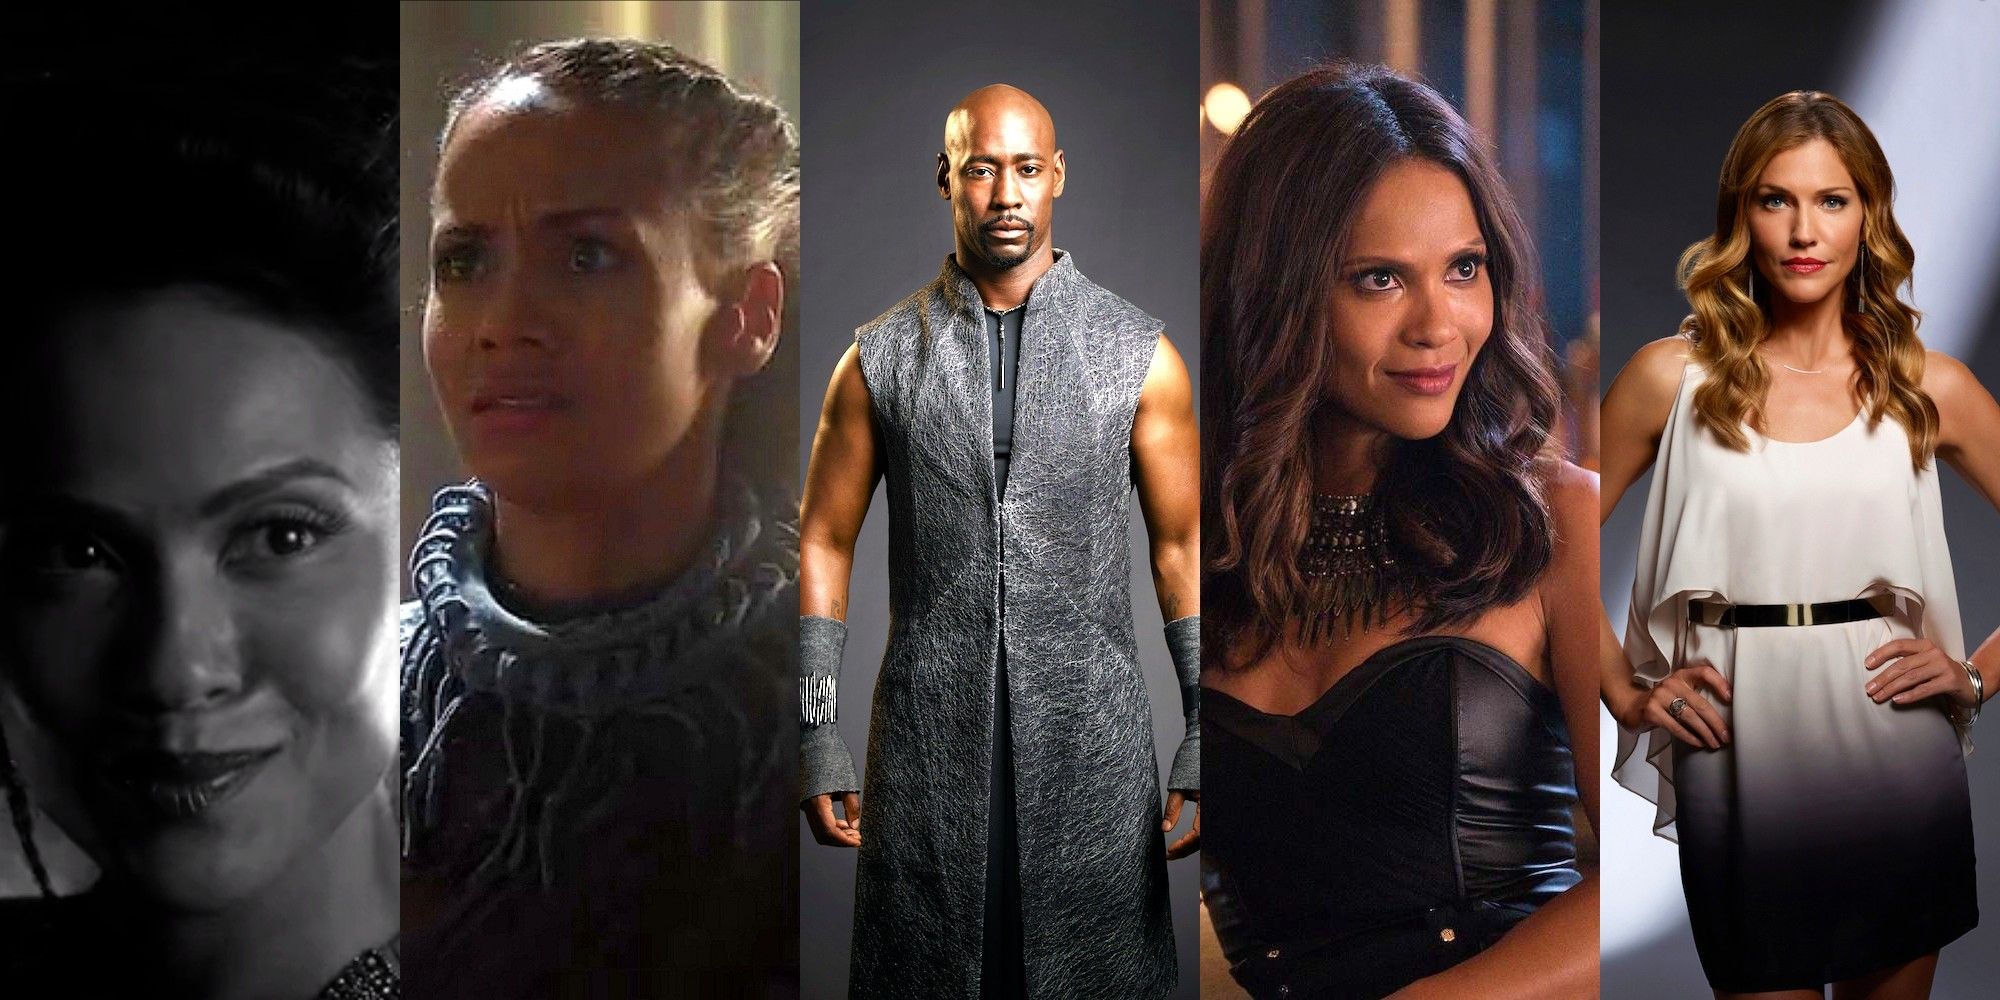 Side by side images feature the Lucifer characters Lilith, Raziel, Amenadiel, Mazikeen, and Goddess